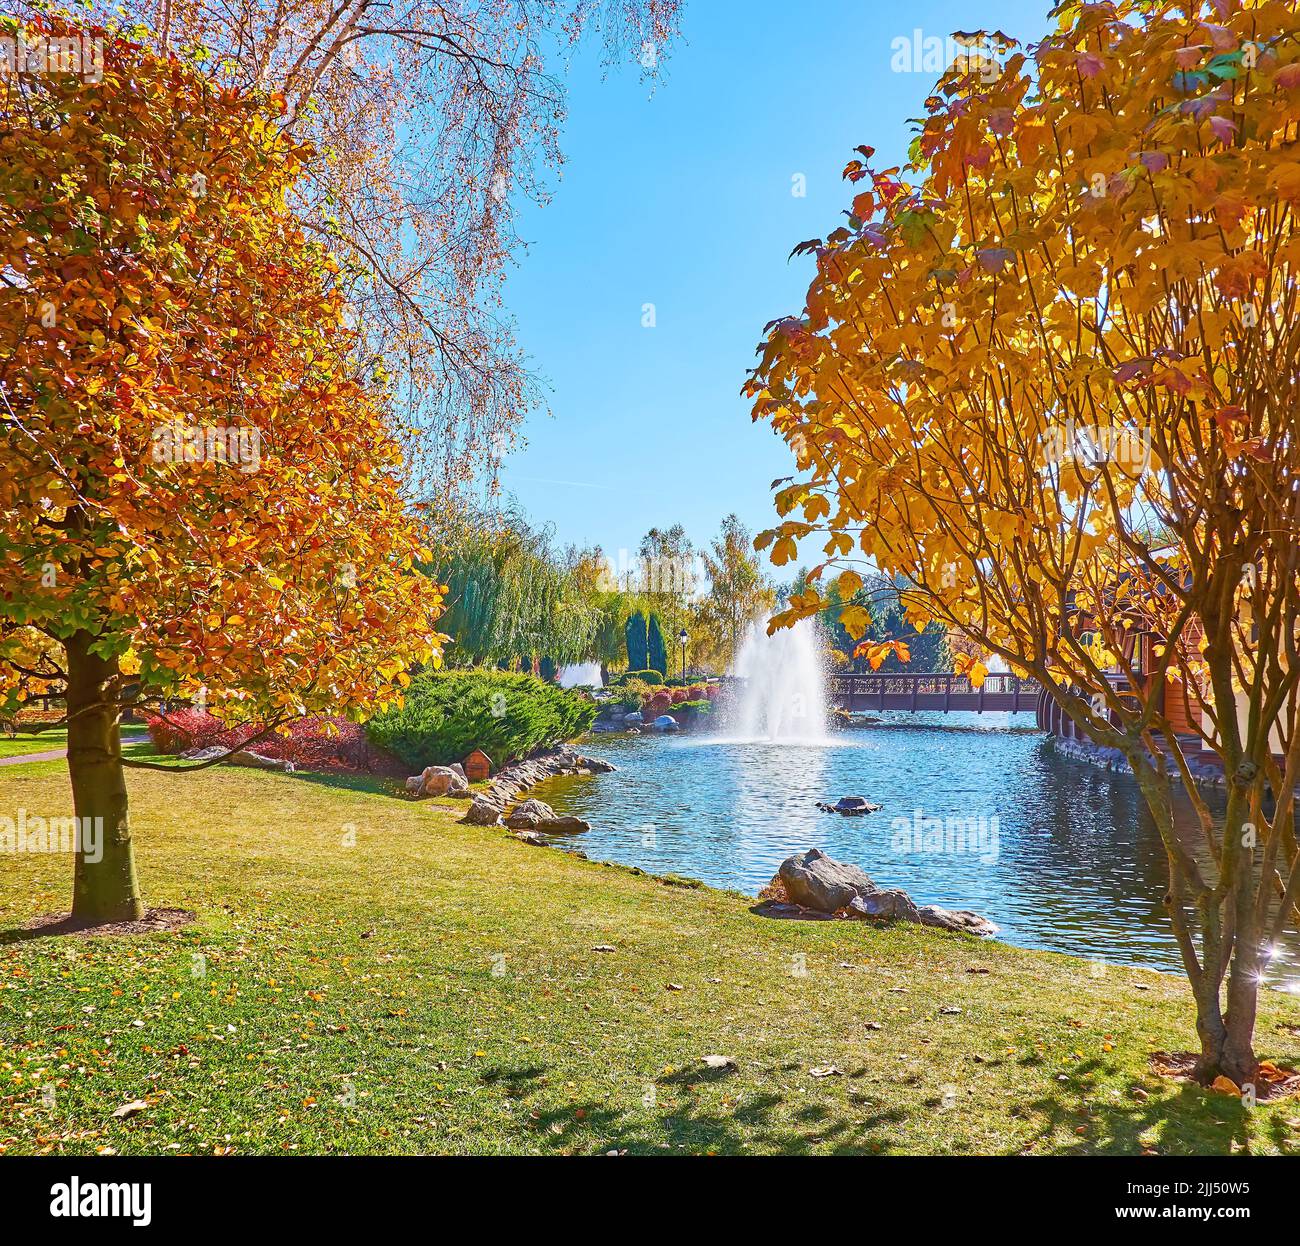 The scenic lake with fountains behind the green grass and bright yellow trees in autumn park, Mezhyhirya, Ukraine Stock Photo